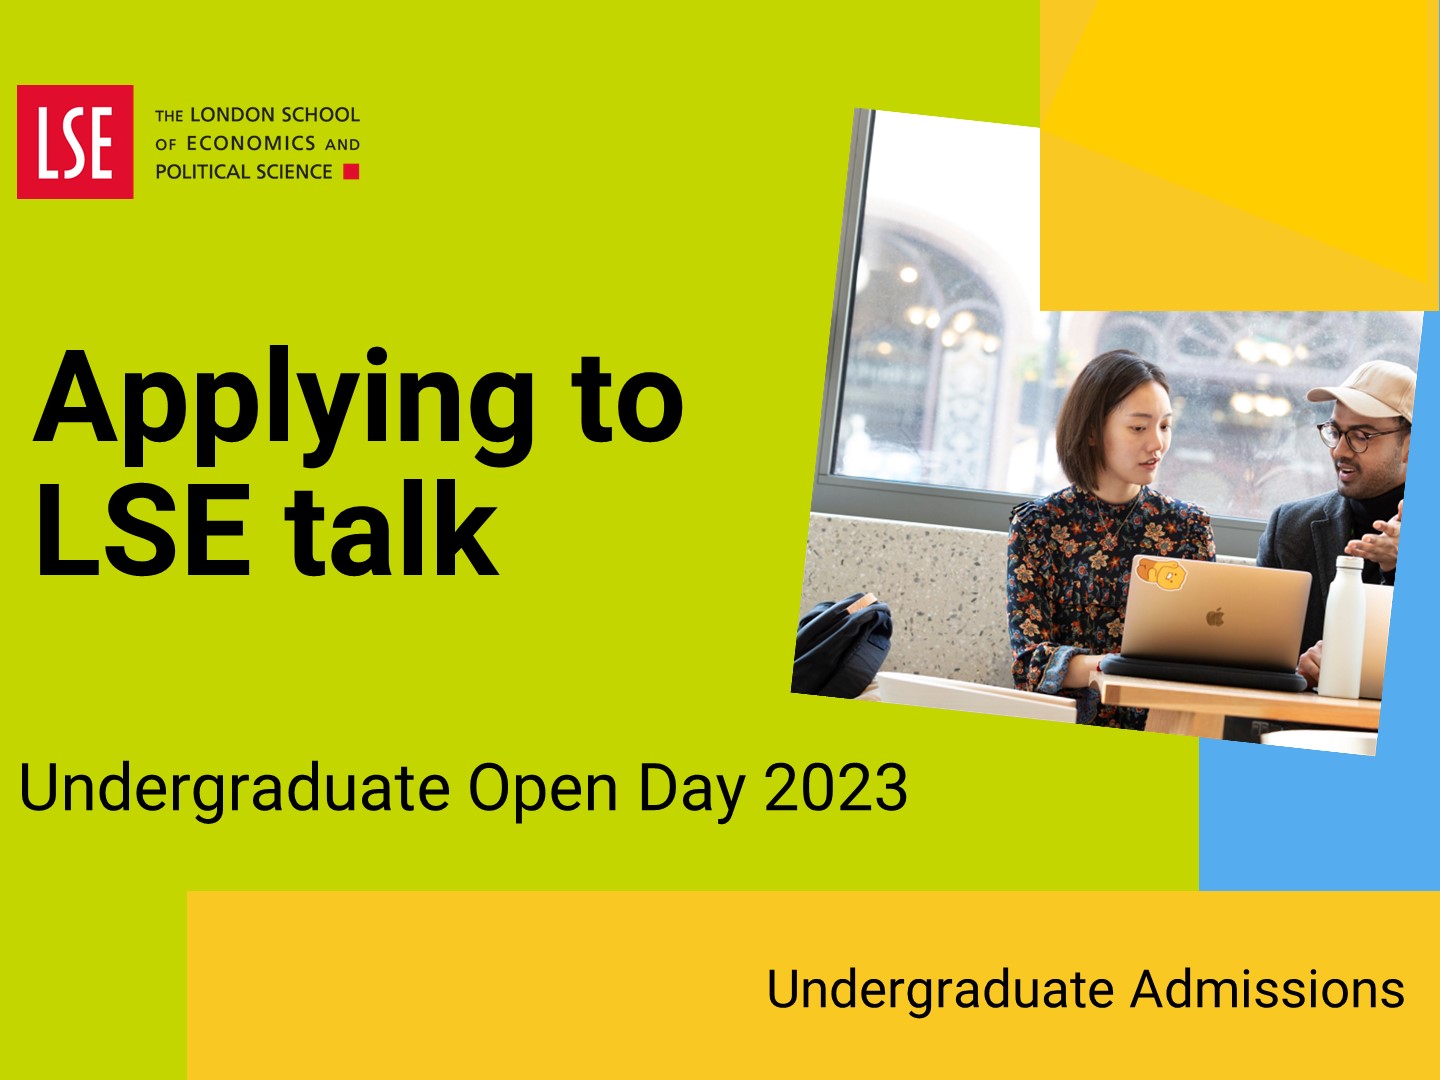 The Undergraduate Admissions team answer questions about the application process for 2024 entry